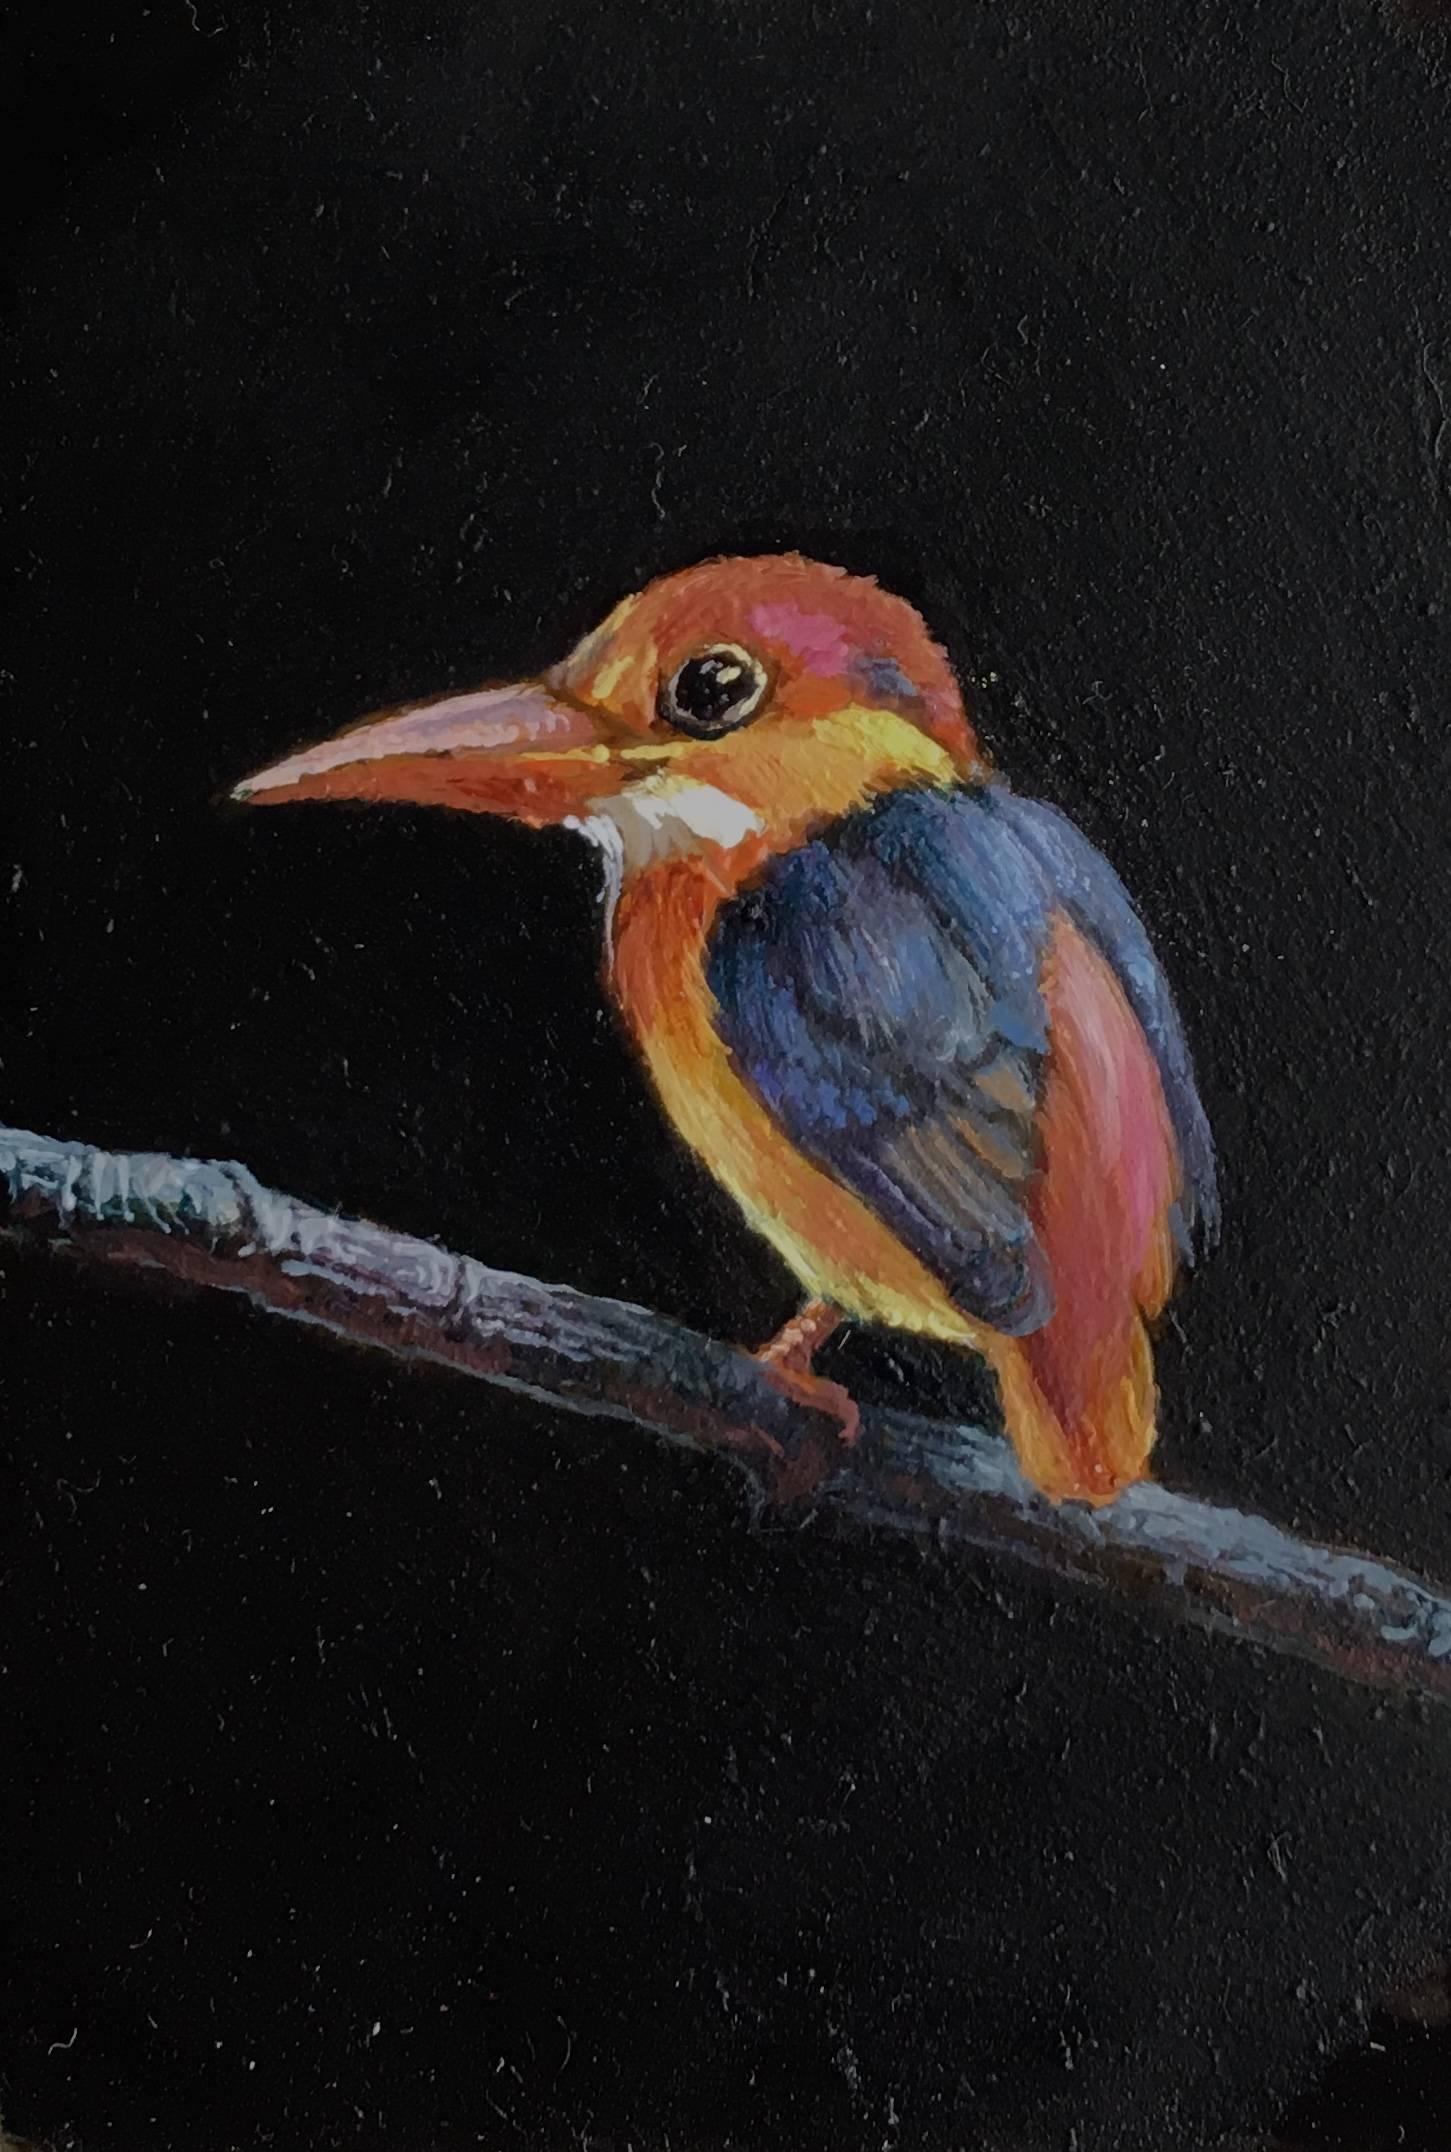 Image size: 2.25 x 1.5 in.
Display size: 5 x 5 in.

Dina Brodsky's realist oil on mylar miniature, "King Fisher," 2018, depicts a tiny multi-hued King Fisher perched on a small branch. The bird's brilliantly saturated crimson, royal blue, and gold